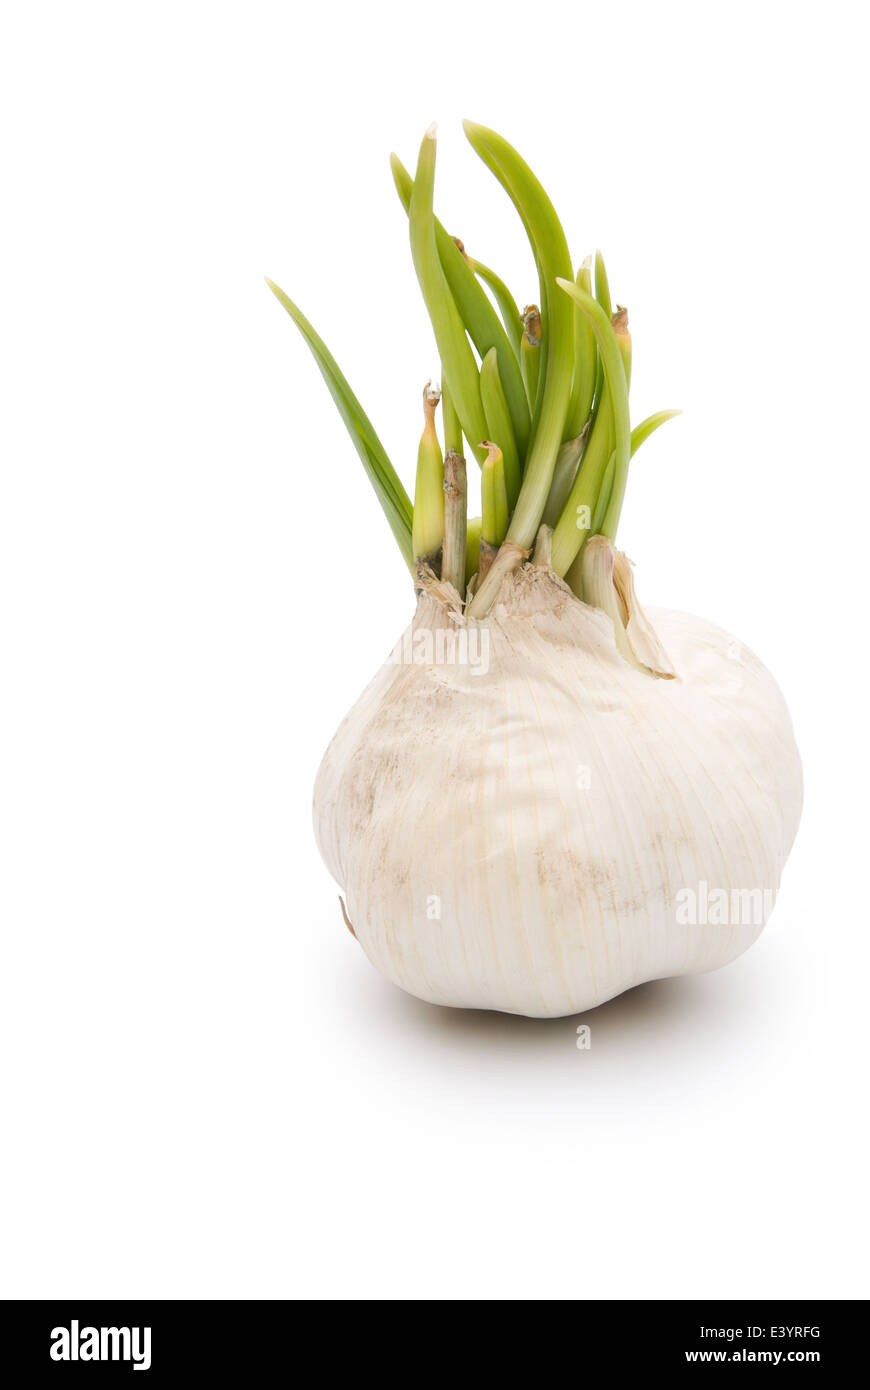 garlic isolated on white background with clipping path Stock Photo